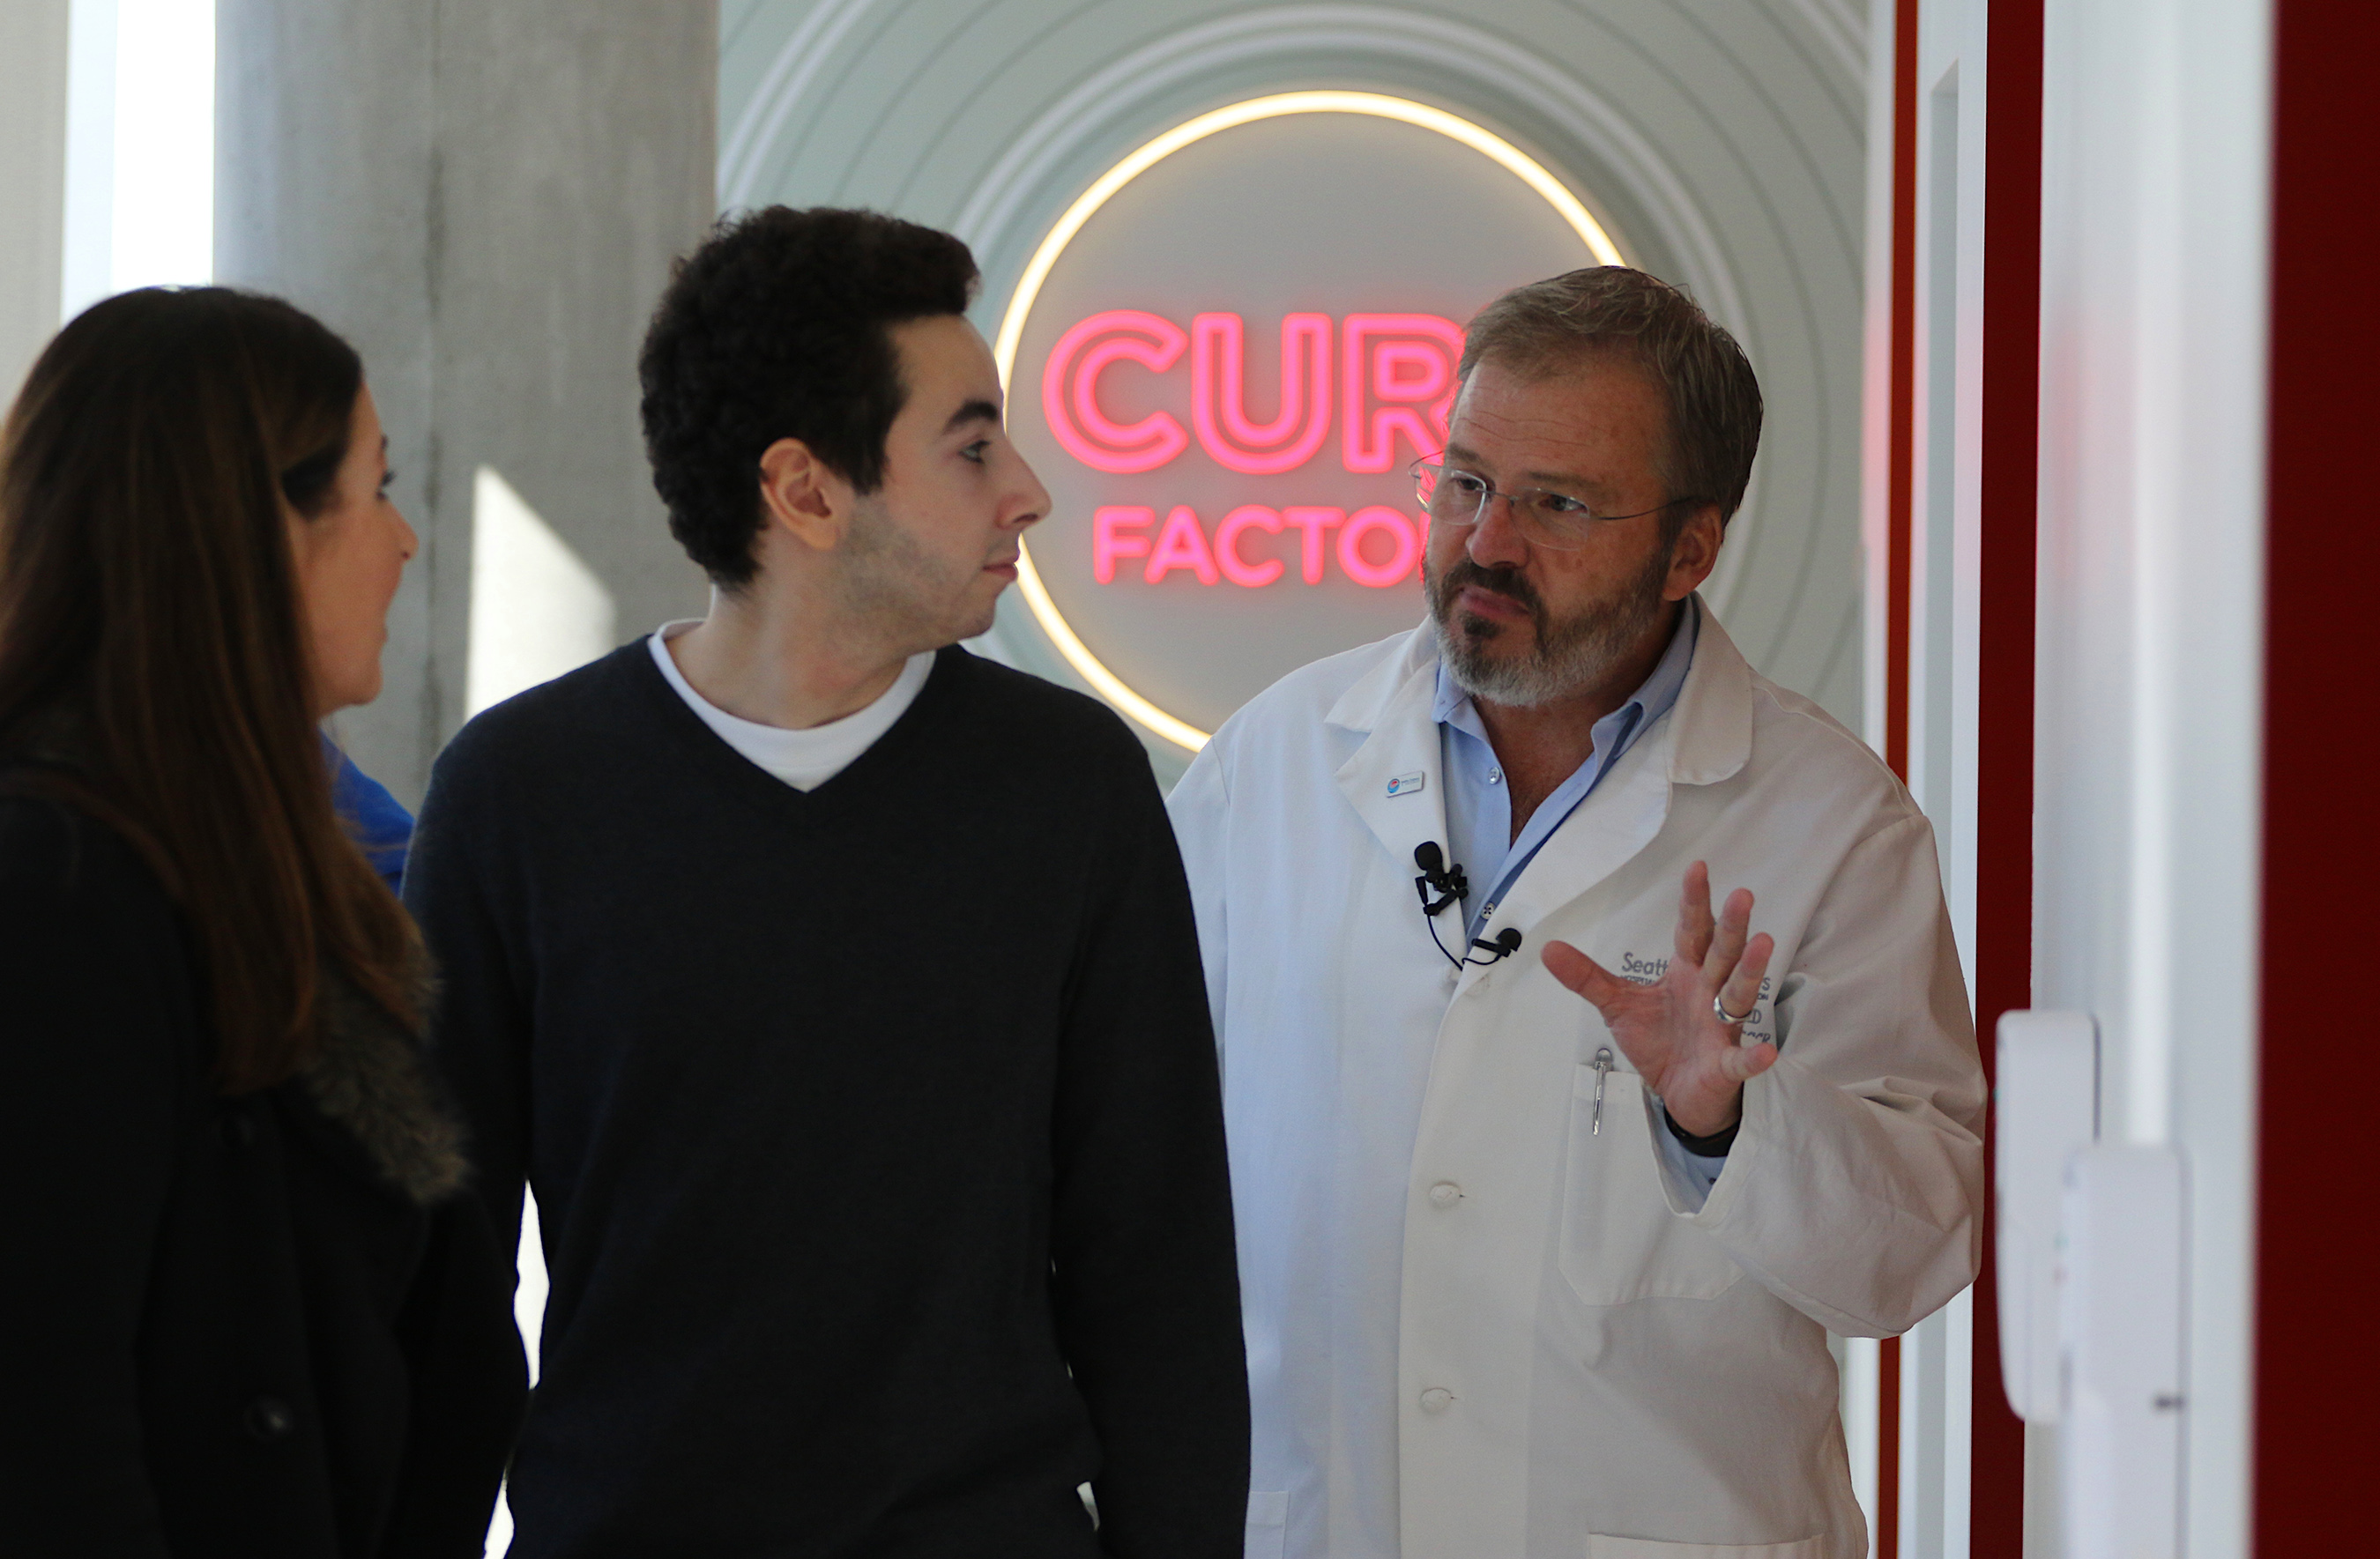 Jedd Feliciano (center), 16, a childhood leukemia survivor who received an experimental T-cell immunotherapy through a Seattle Children's clinical trial, tours the Cure Factory facility in Building Cure with his mom, Maryn Sage (left), and Dr. Michael Jensen (right), the director of the Ben Towne Center for Childhood Cancer Research at Seattle Children's Research Institute.